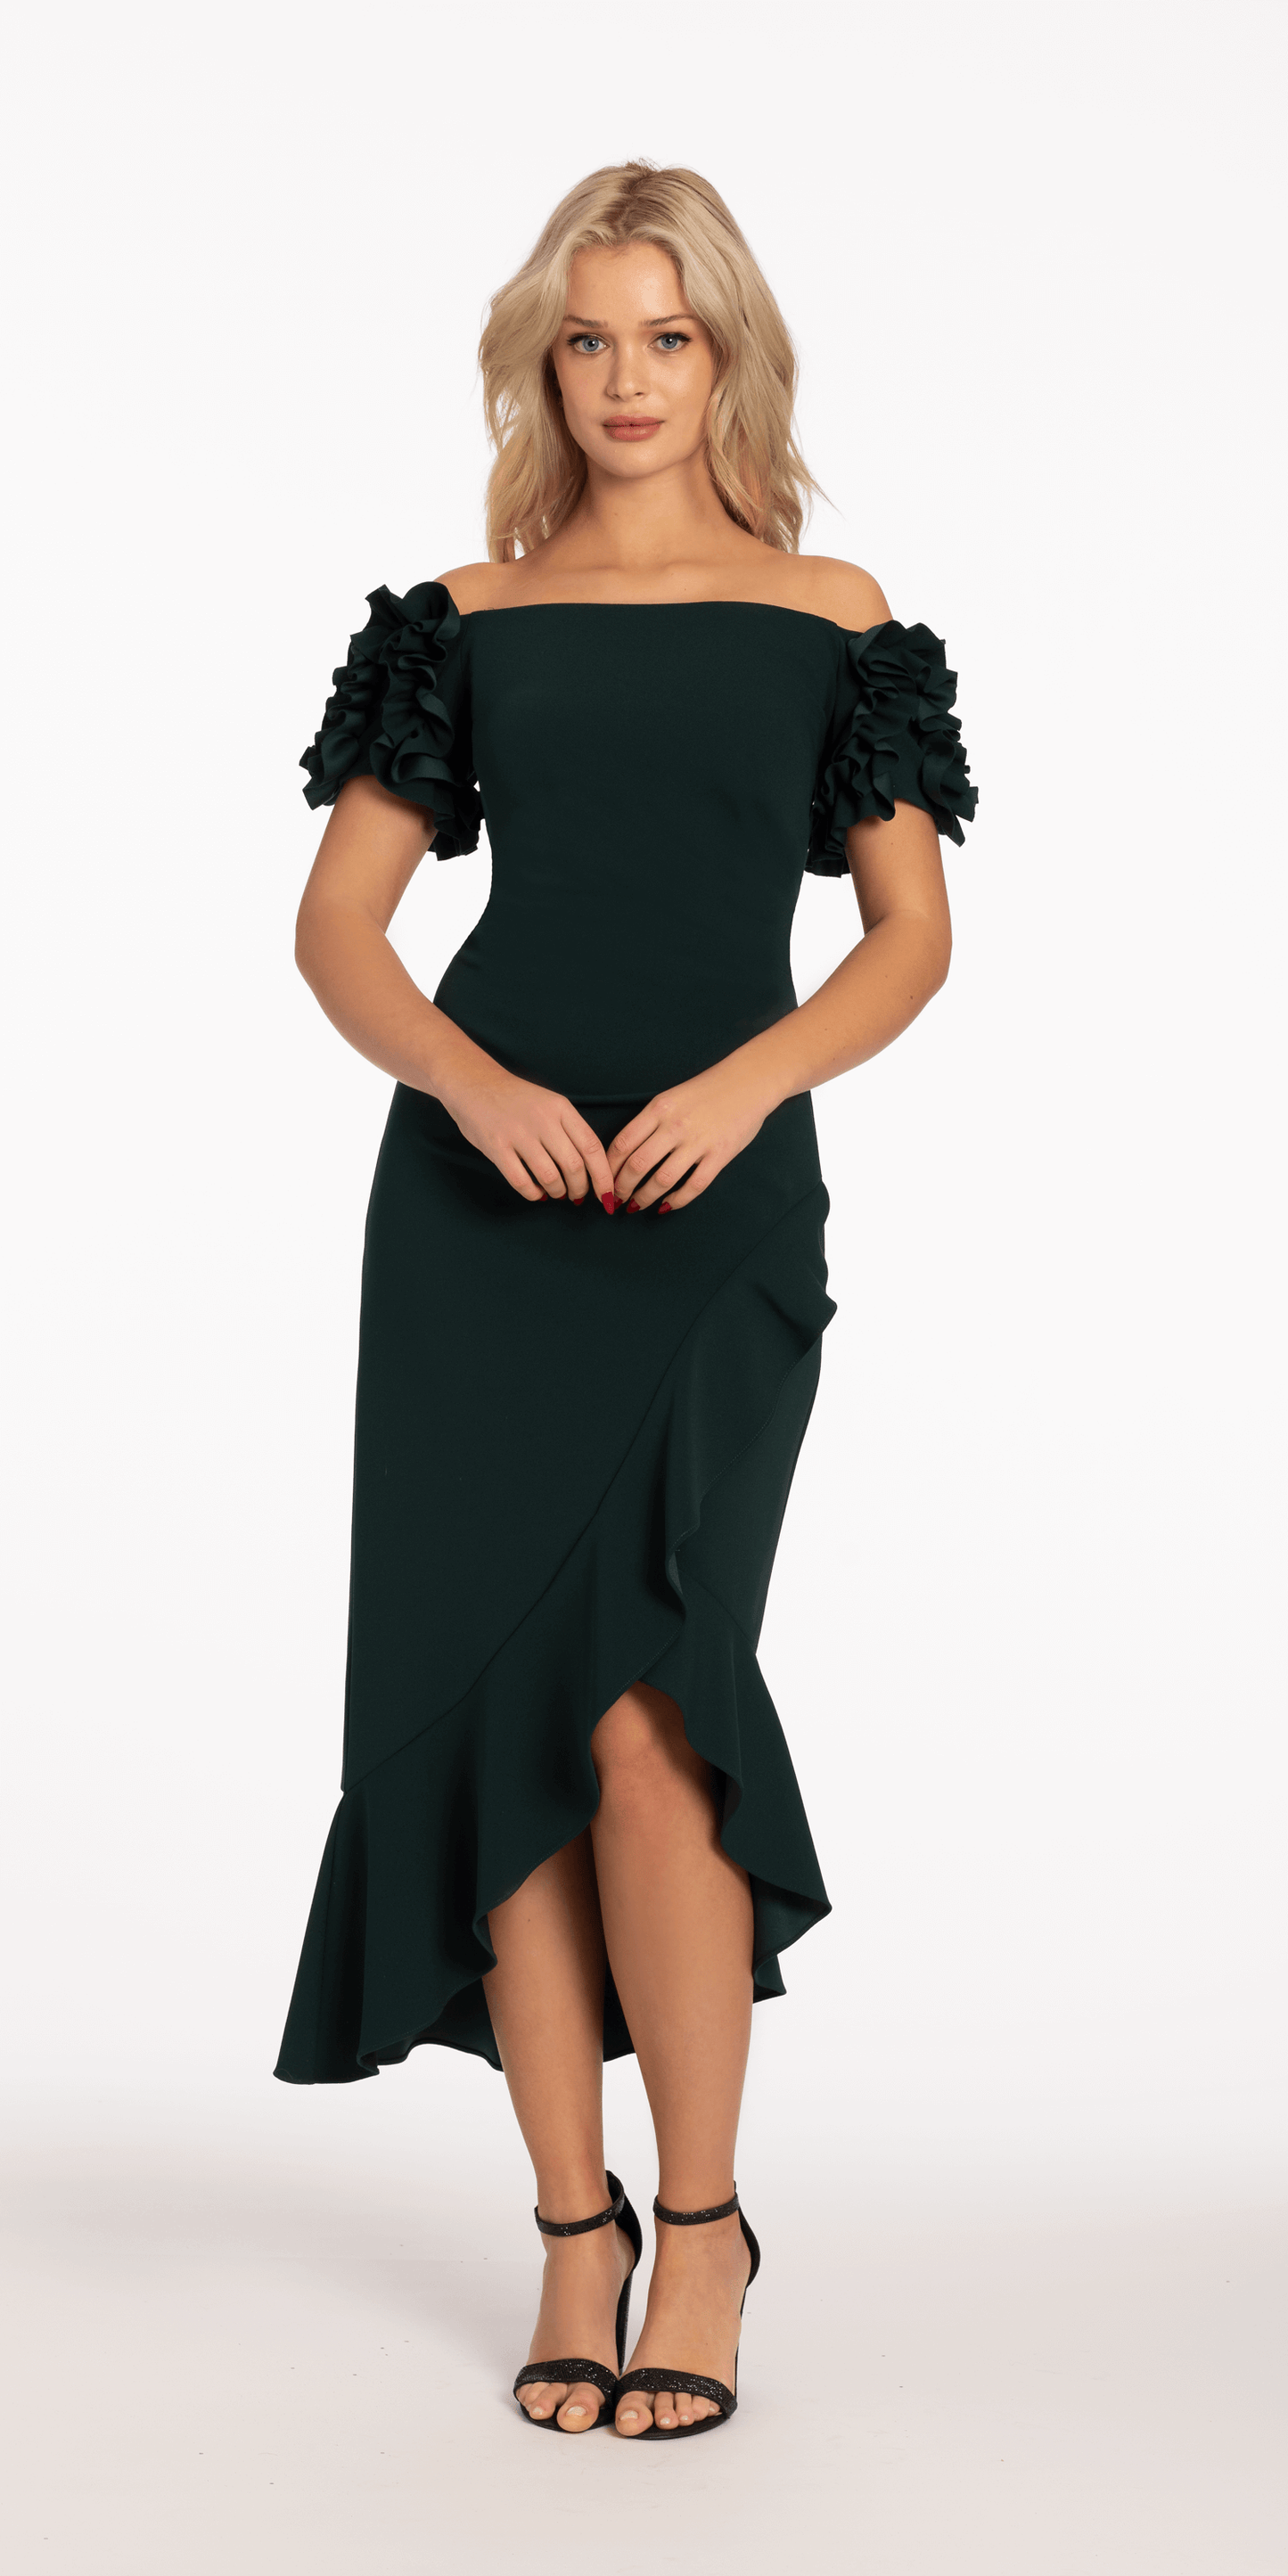 Camille La Vie Crepe Puff Sleeve Off the Shoulder Dress with Ruching missy / 4 / pine-green